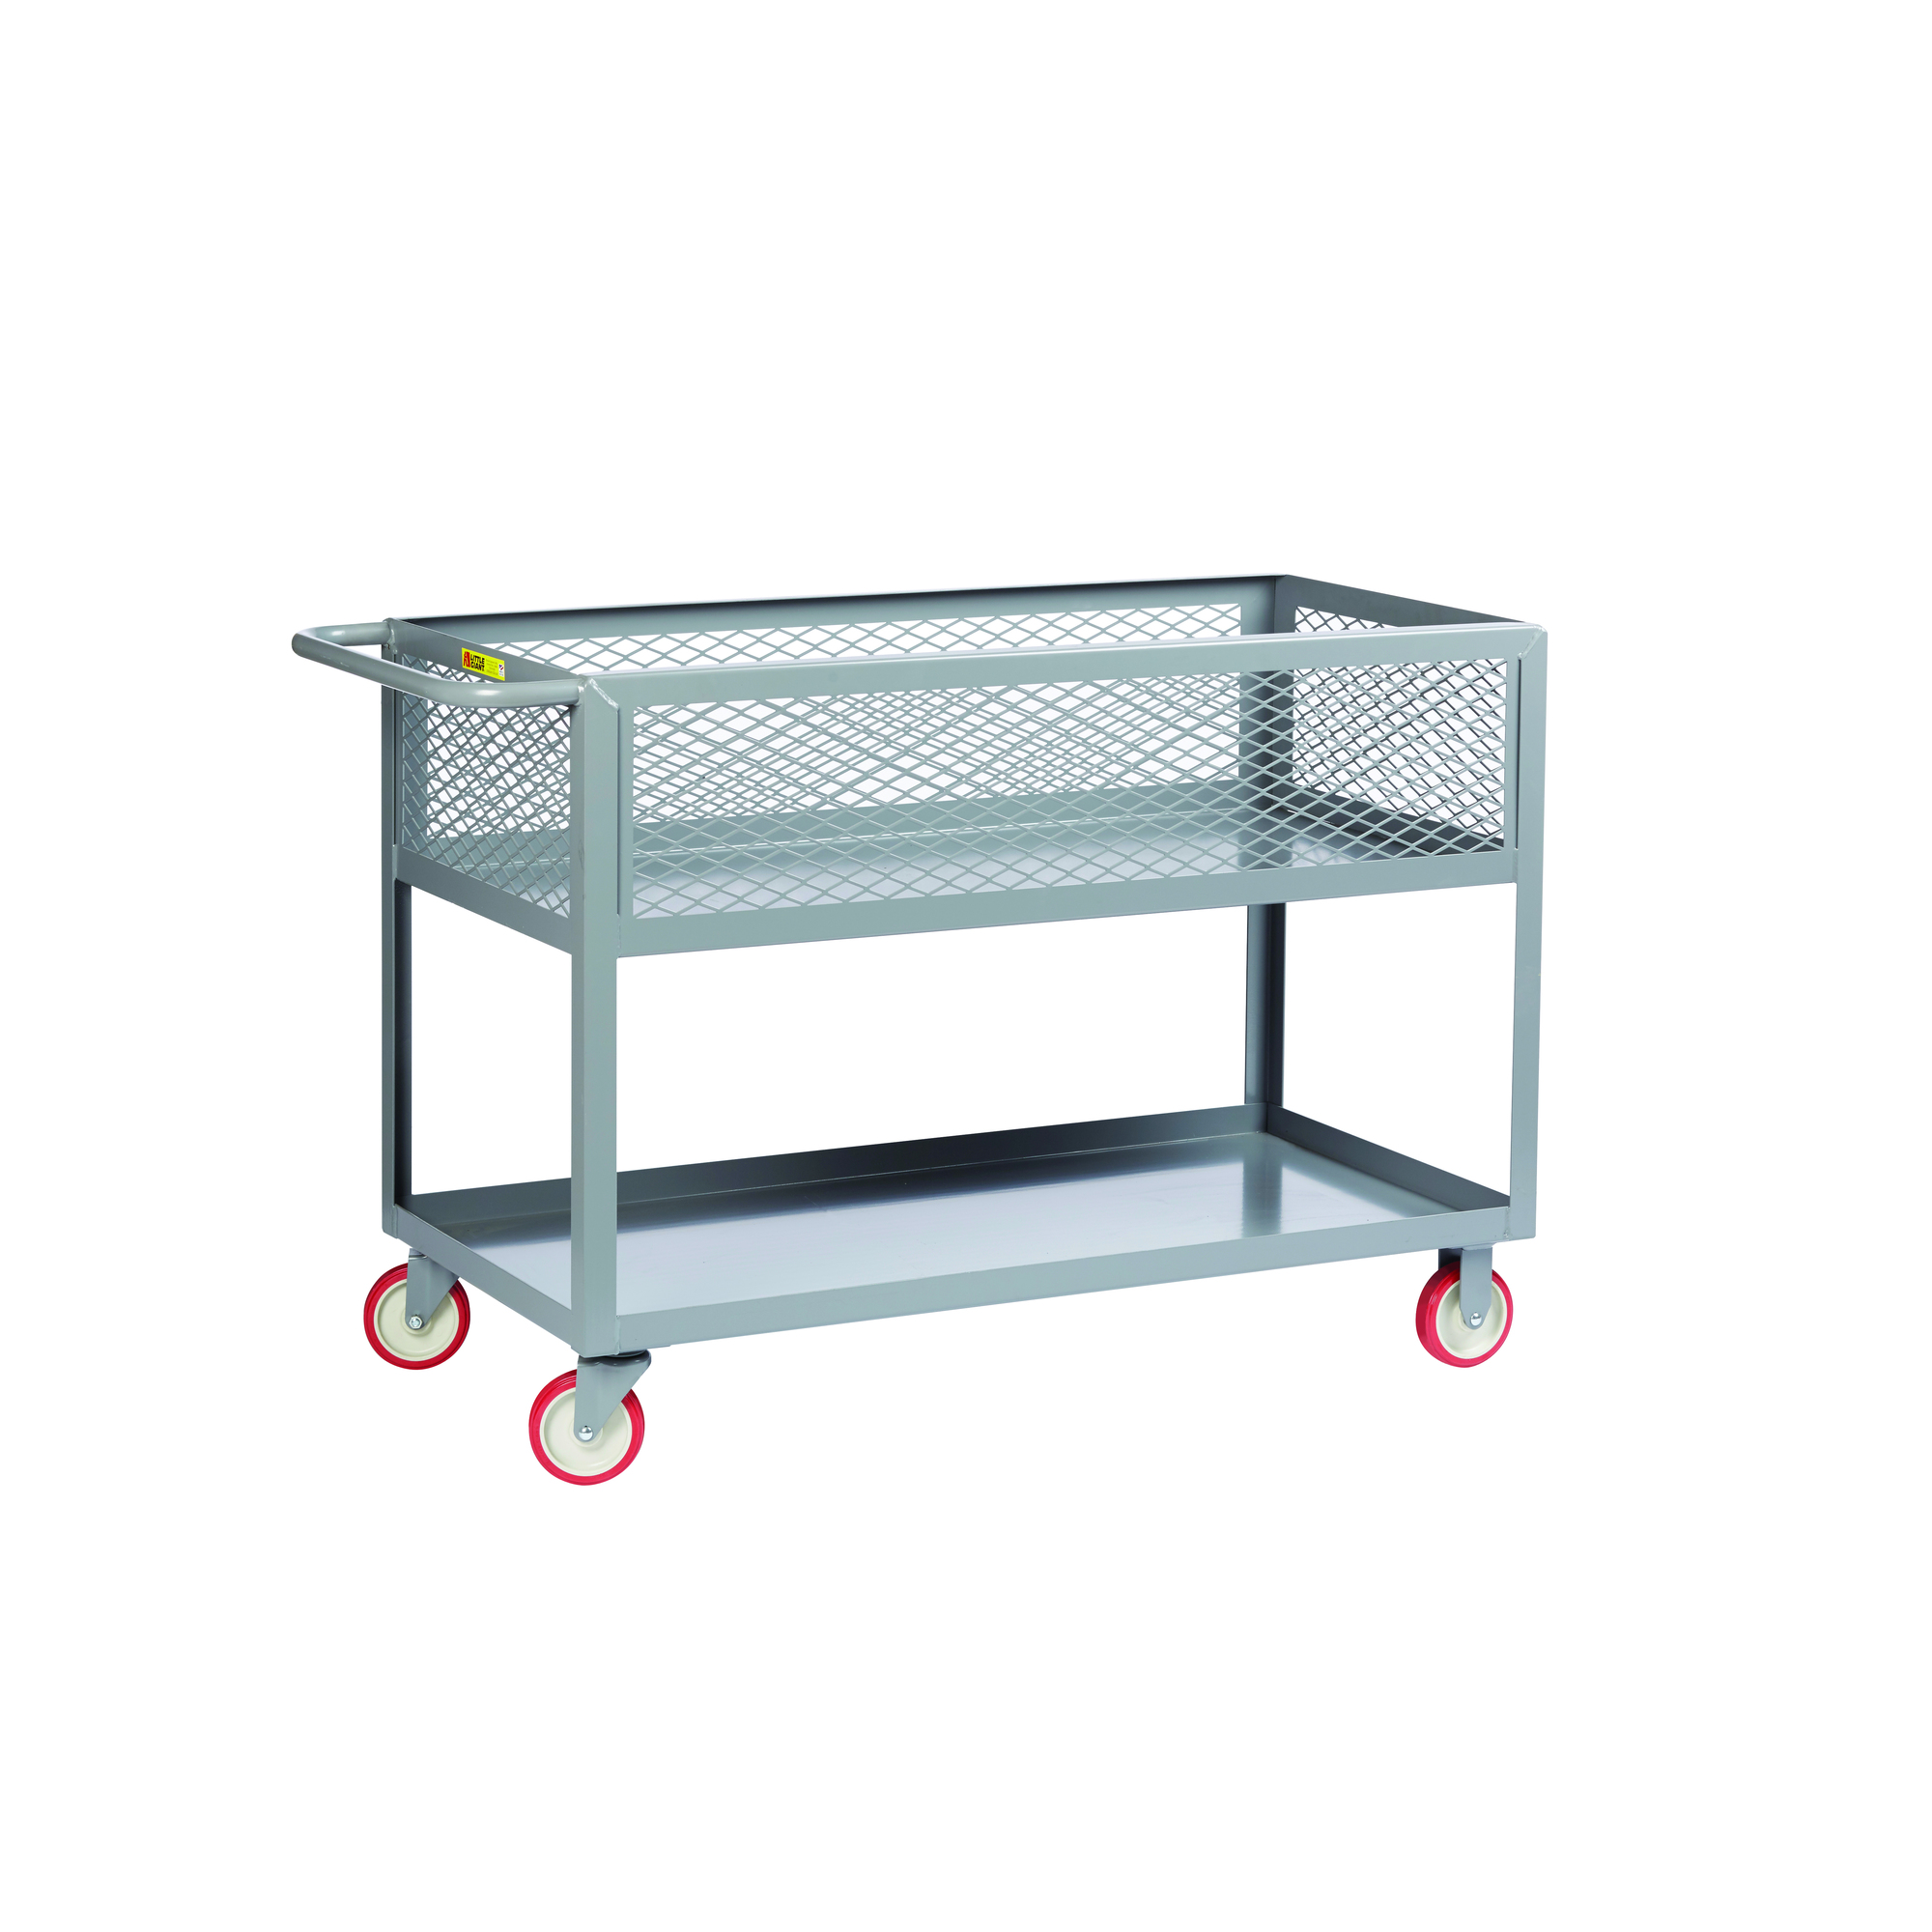 Little Giant, 12Inch Deep Shelf Truck, Mesh Sides, 18x30, 1200 lbs, Total Capacity 1200 lb, Shelves (qty.) 2, Material Carbon Steel, Model DSX-1830-